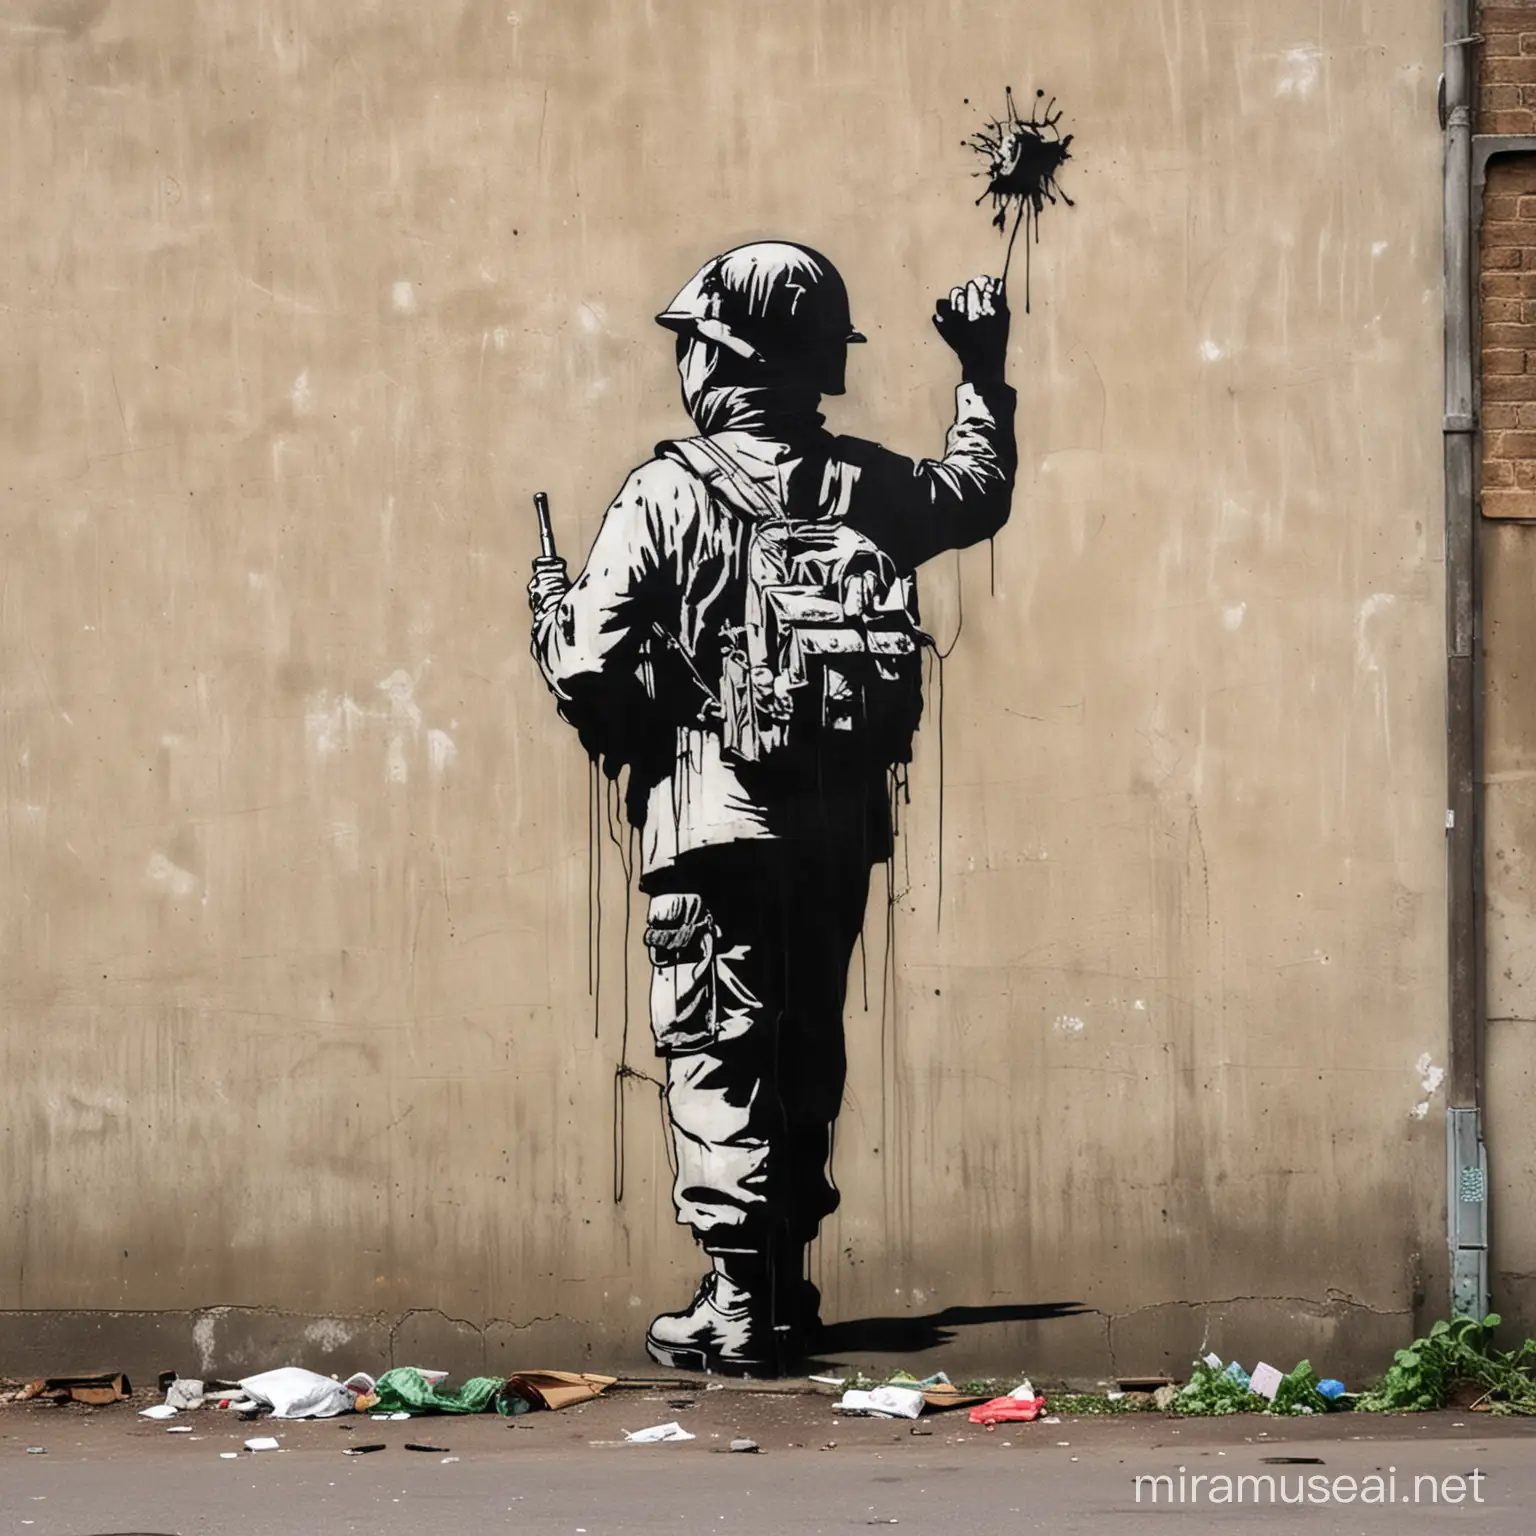 a graffiti that banksy would make it should describe the current state of the wrold and all the wars going on around us